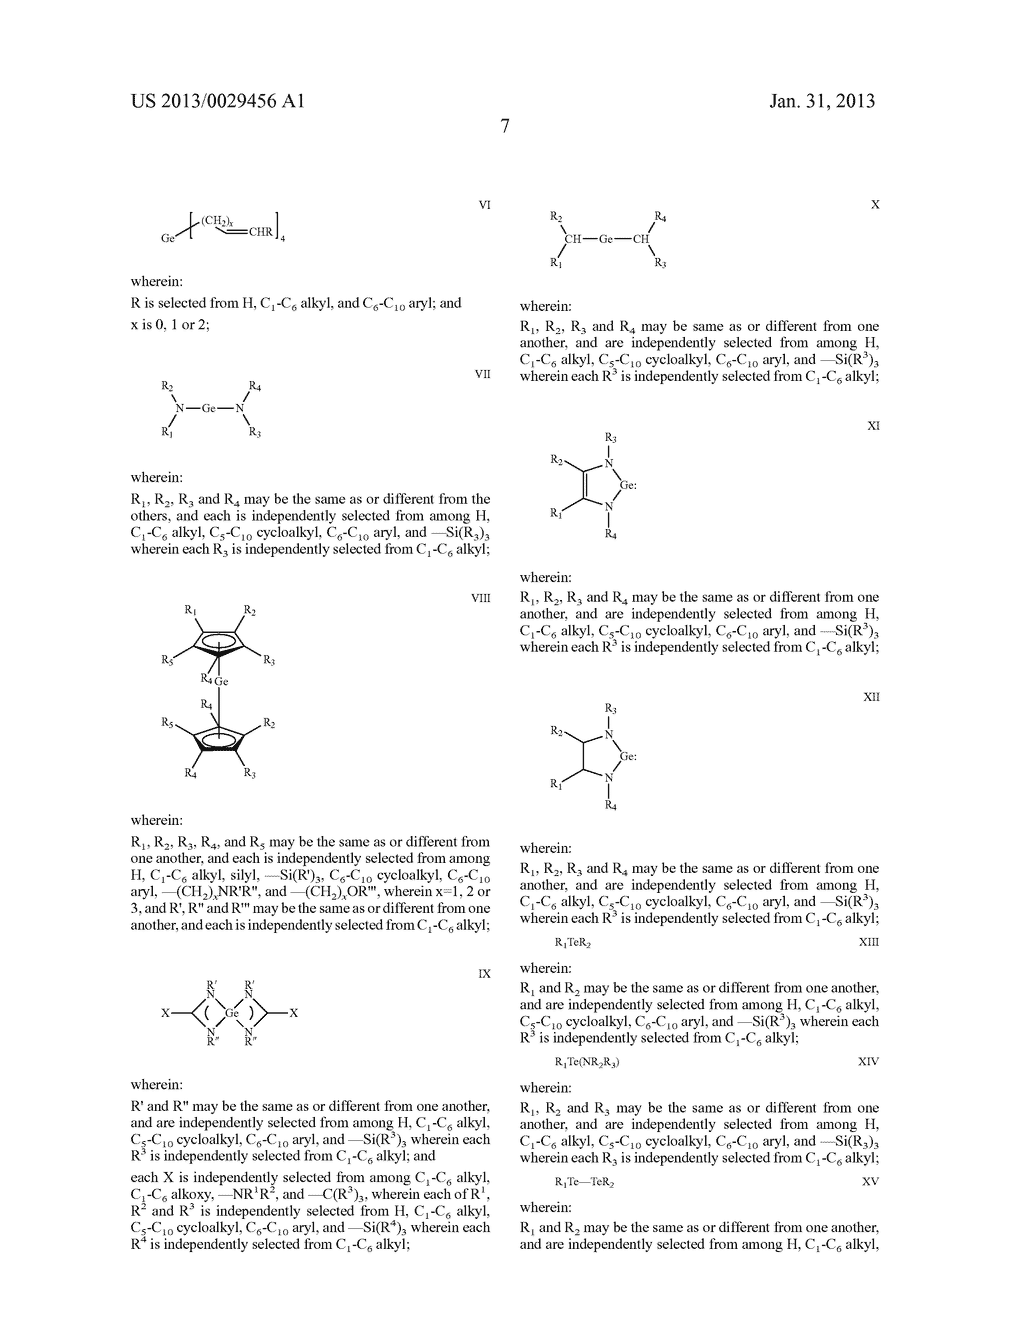 ANTIMONY AND GERMANIUM COMPLEXES USEFUL FOR CVD/ALD OF METAL THIN FILMS - diagram, schematic, and image 13